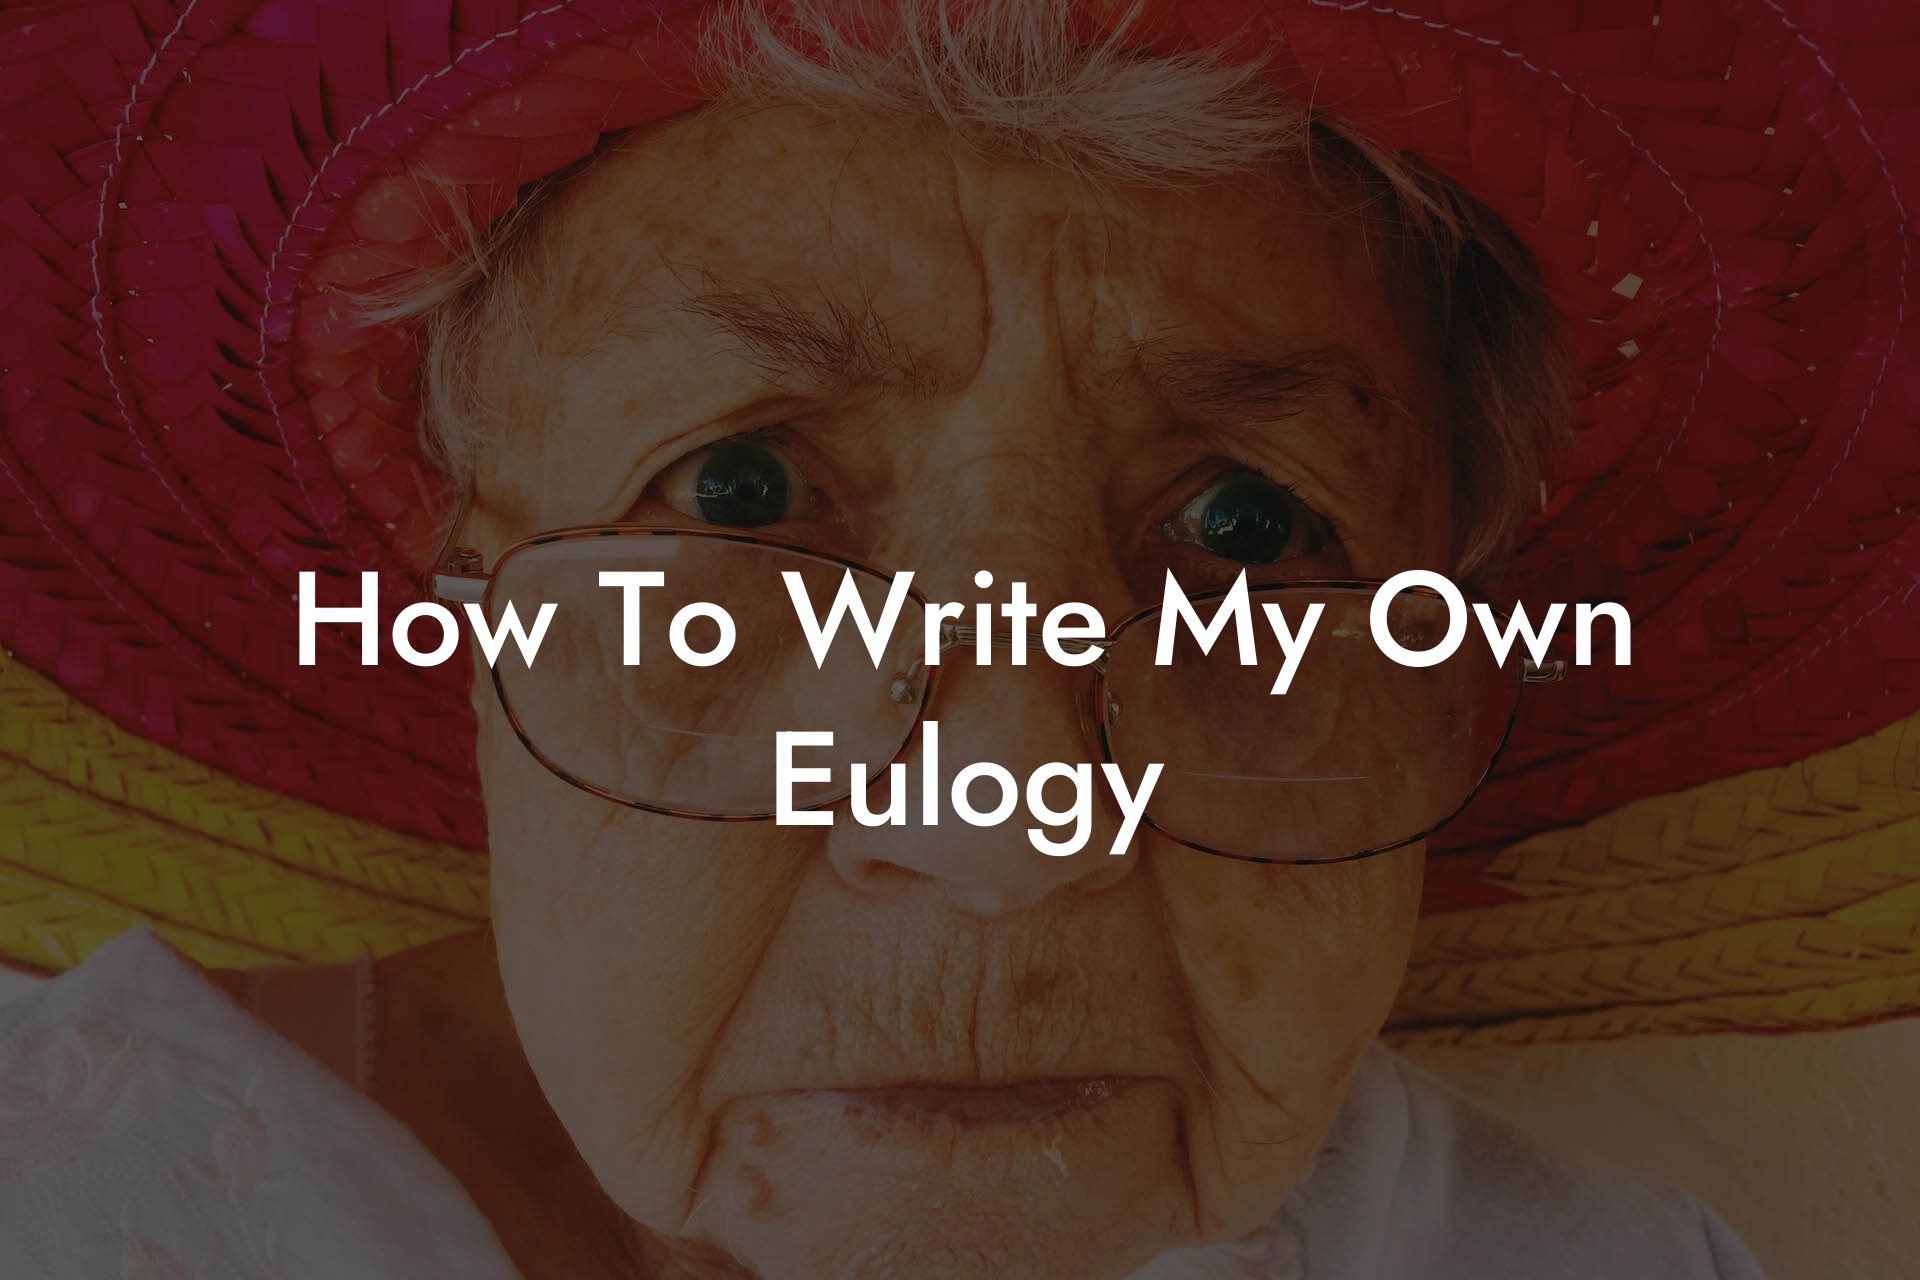 How To Write My Own Eulogy